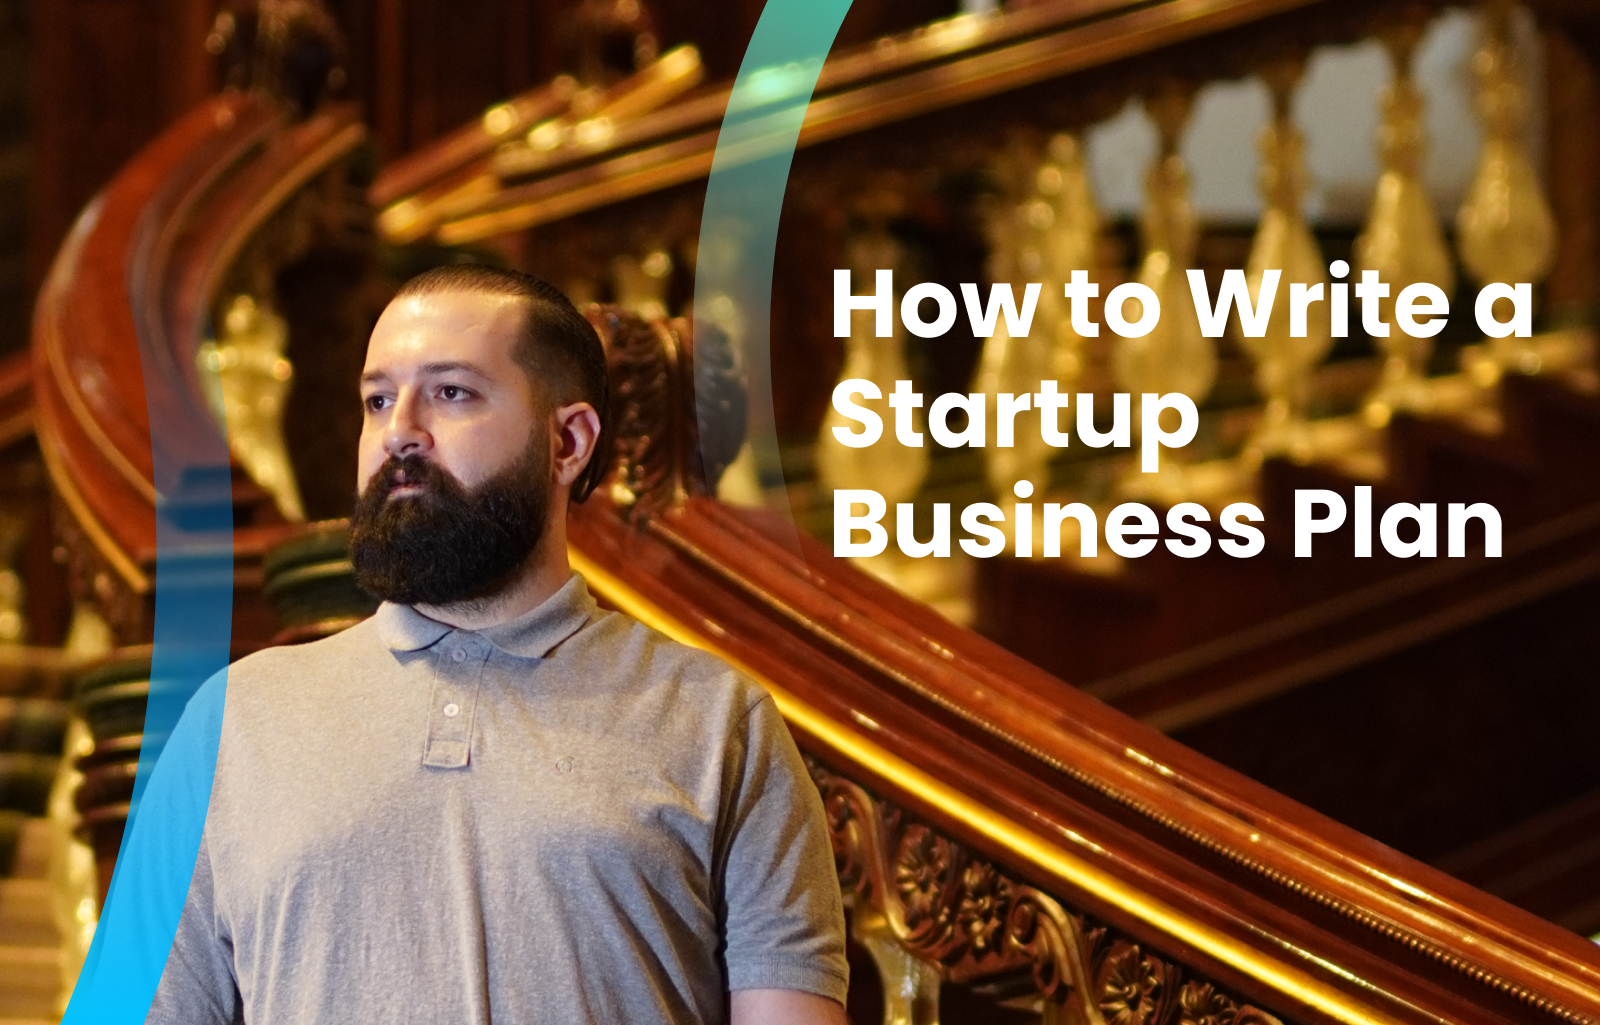 Business Planning for Startups – How to Write a Startup Business Plan